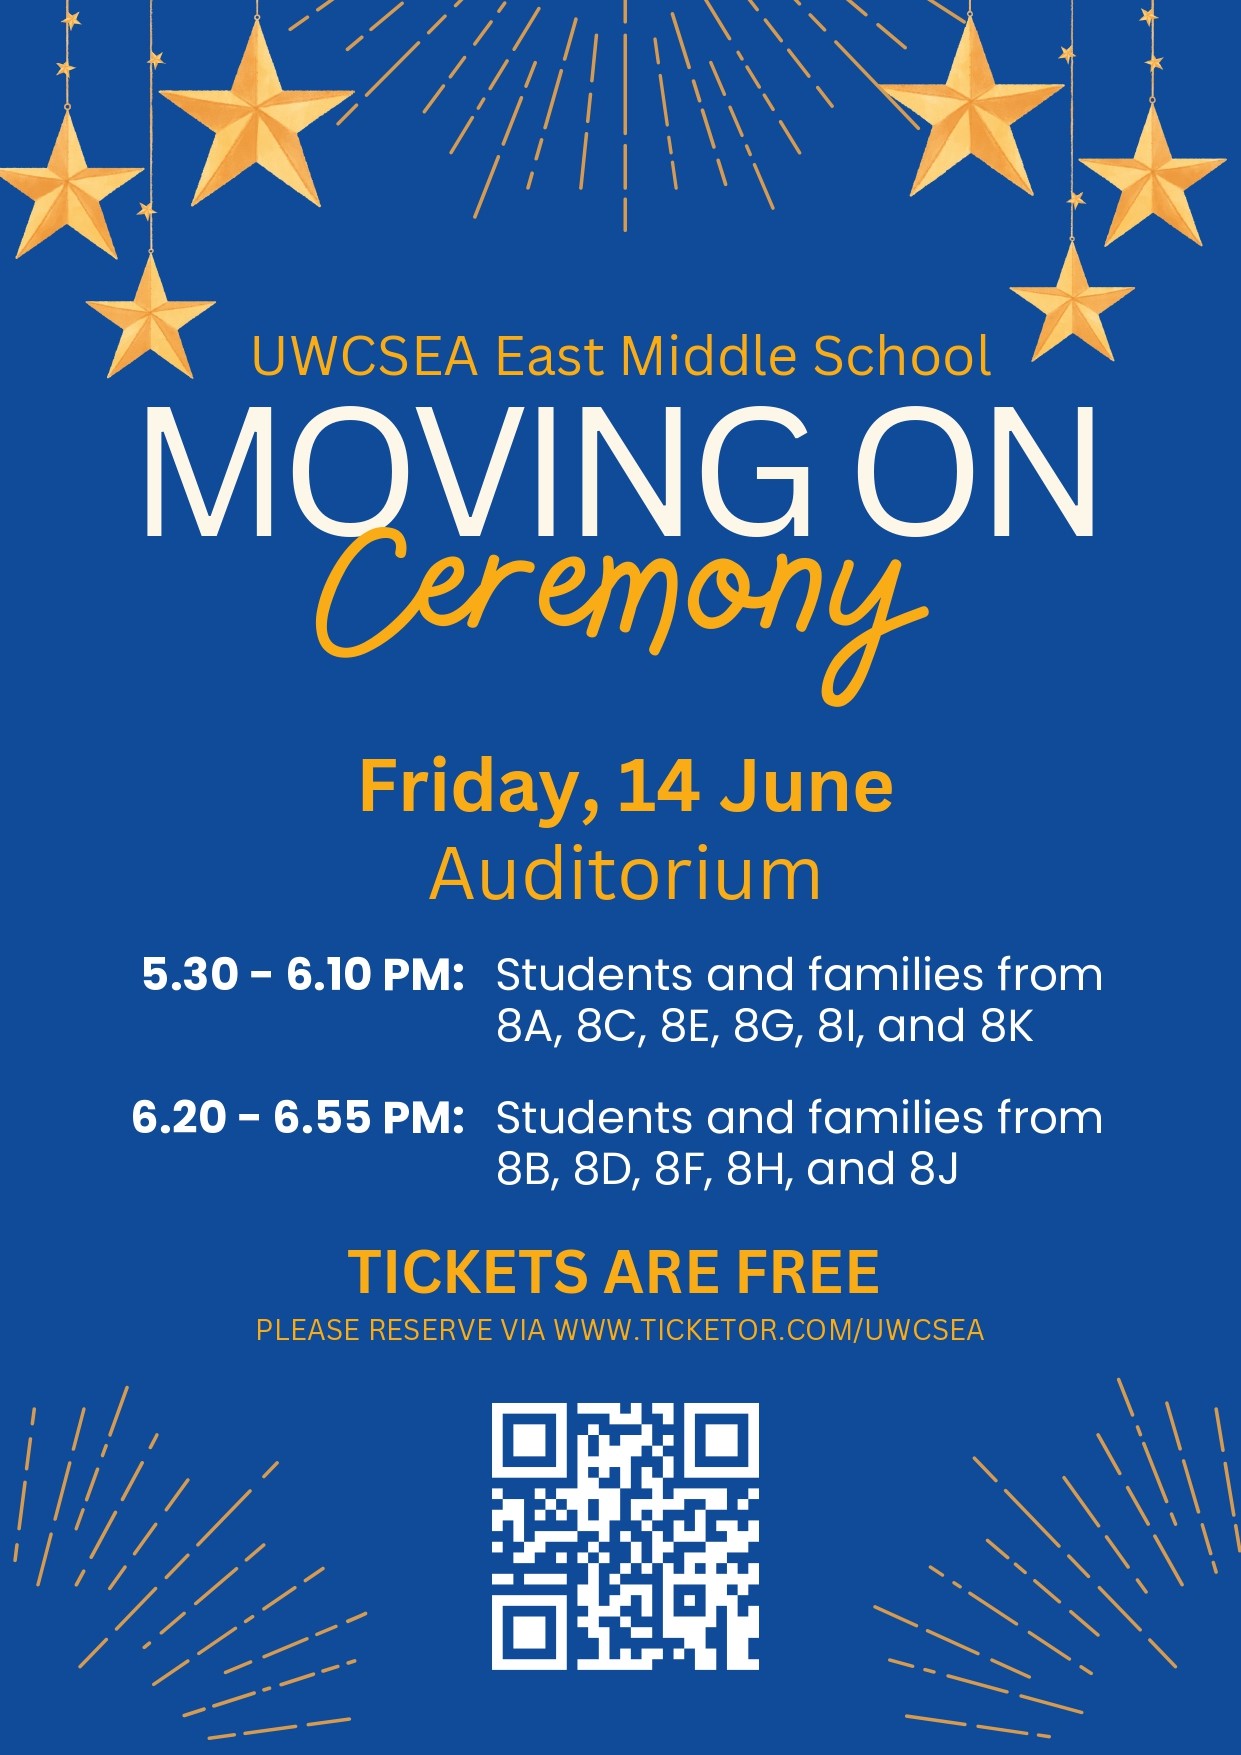 Grade 8 Moving On Assembly 2 (featuring G8 B, D, F, H, J)  on Jun 14, 18:20@UWCSEA East Auditorium - Pick a seat, Buy tickets and Get information on UWCSEA Ticket Hub uwcsea